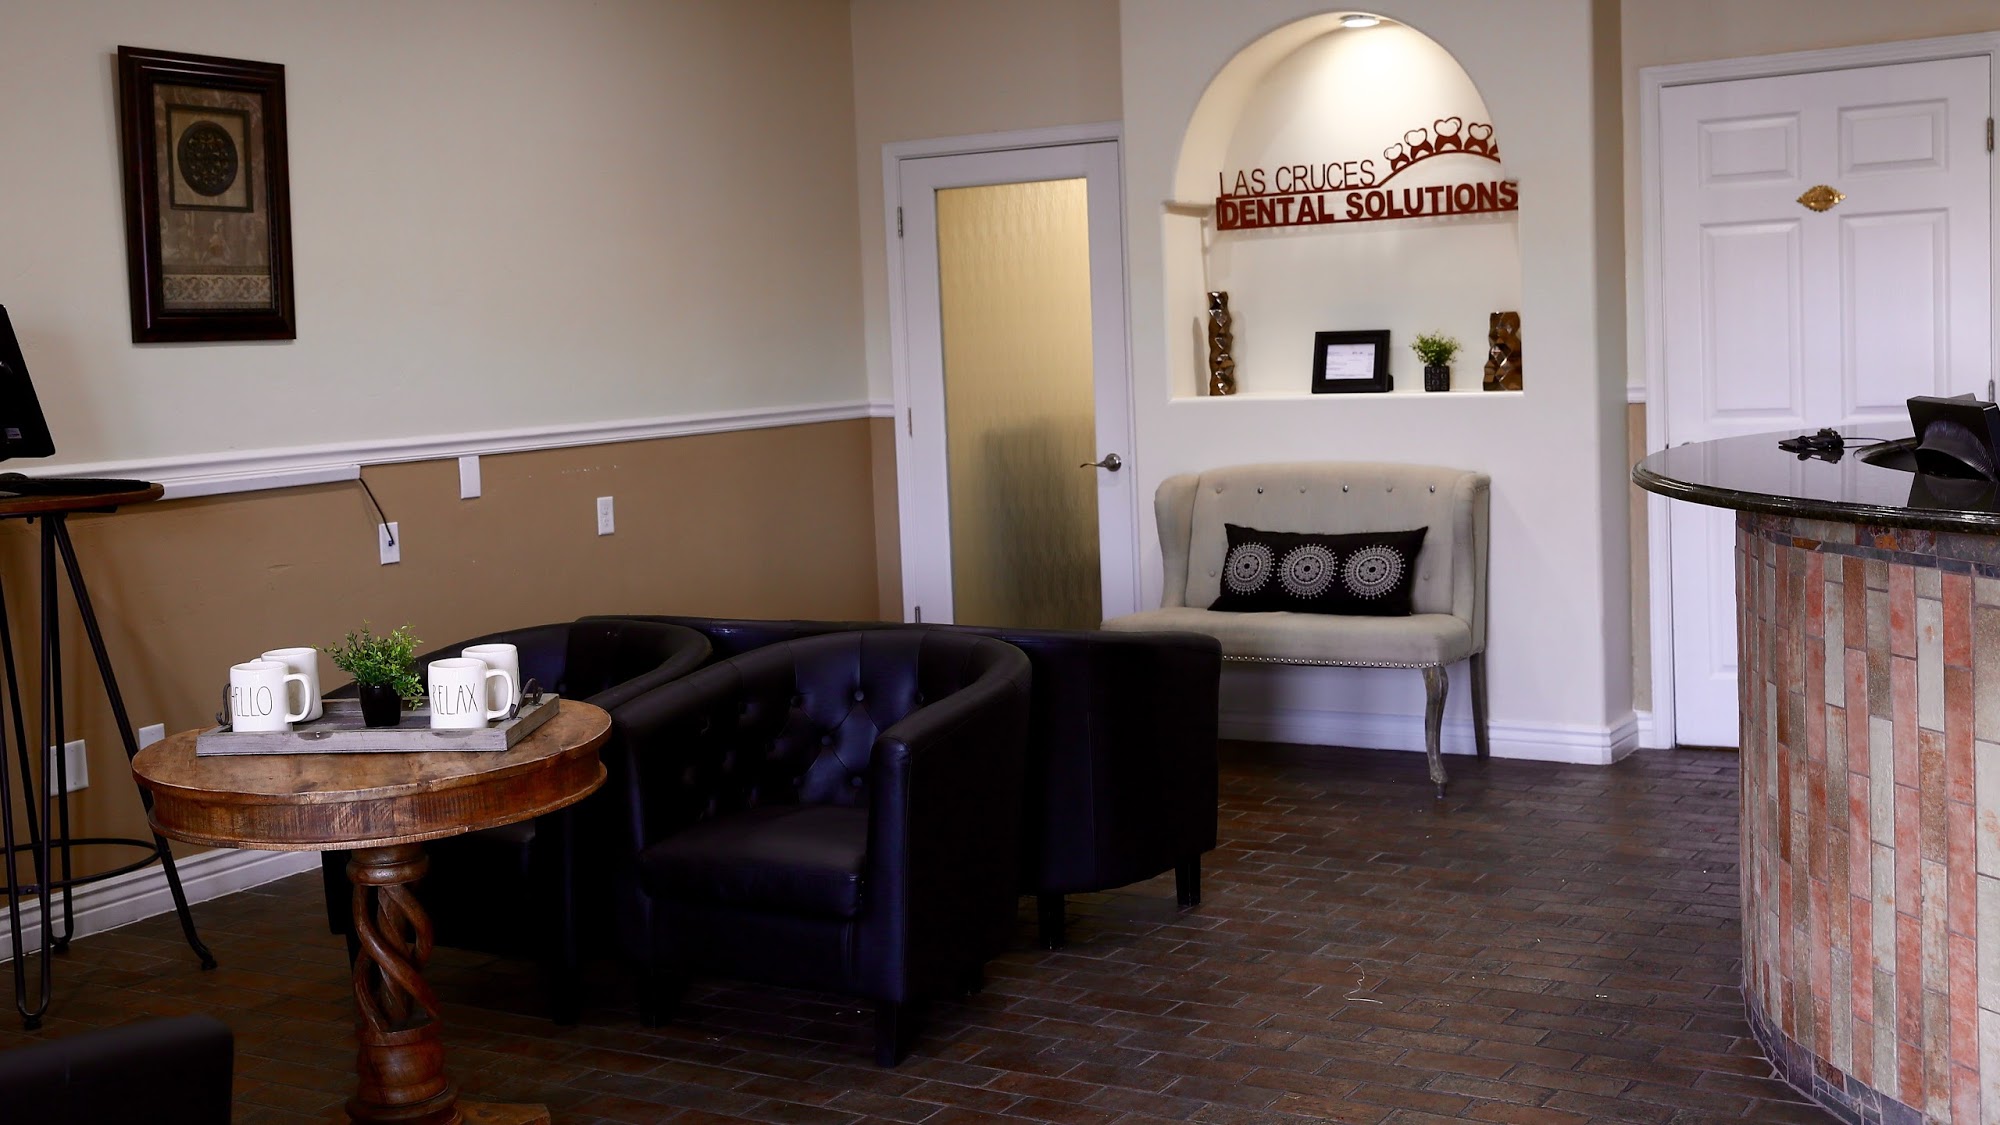 Las Cruces Dental Solutions